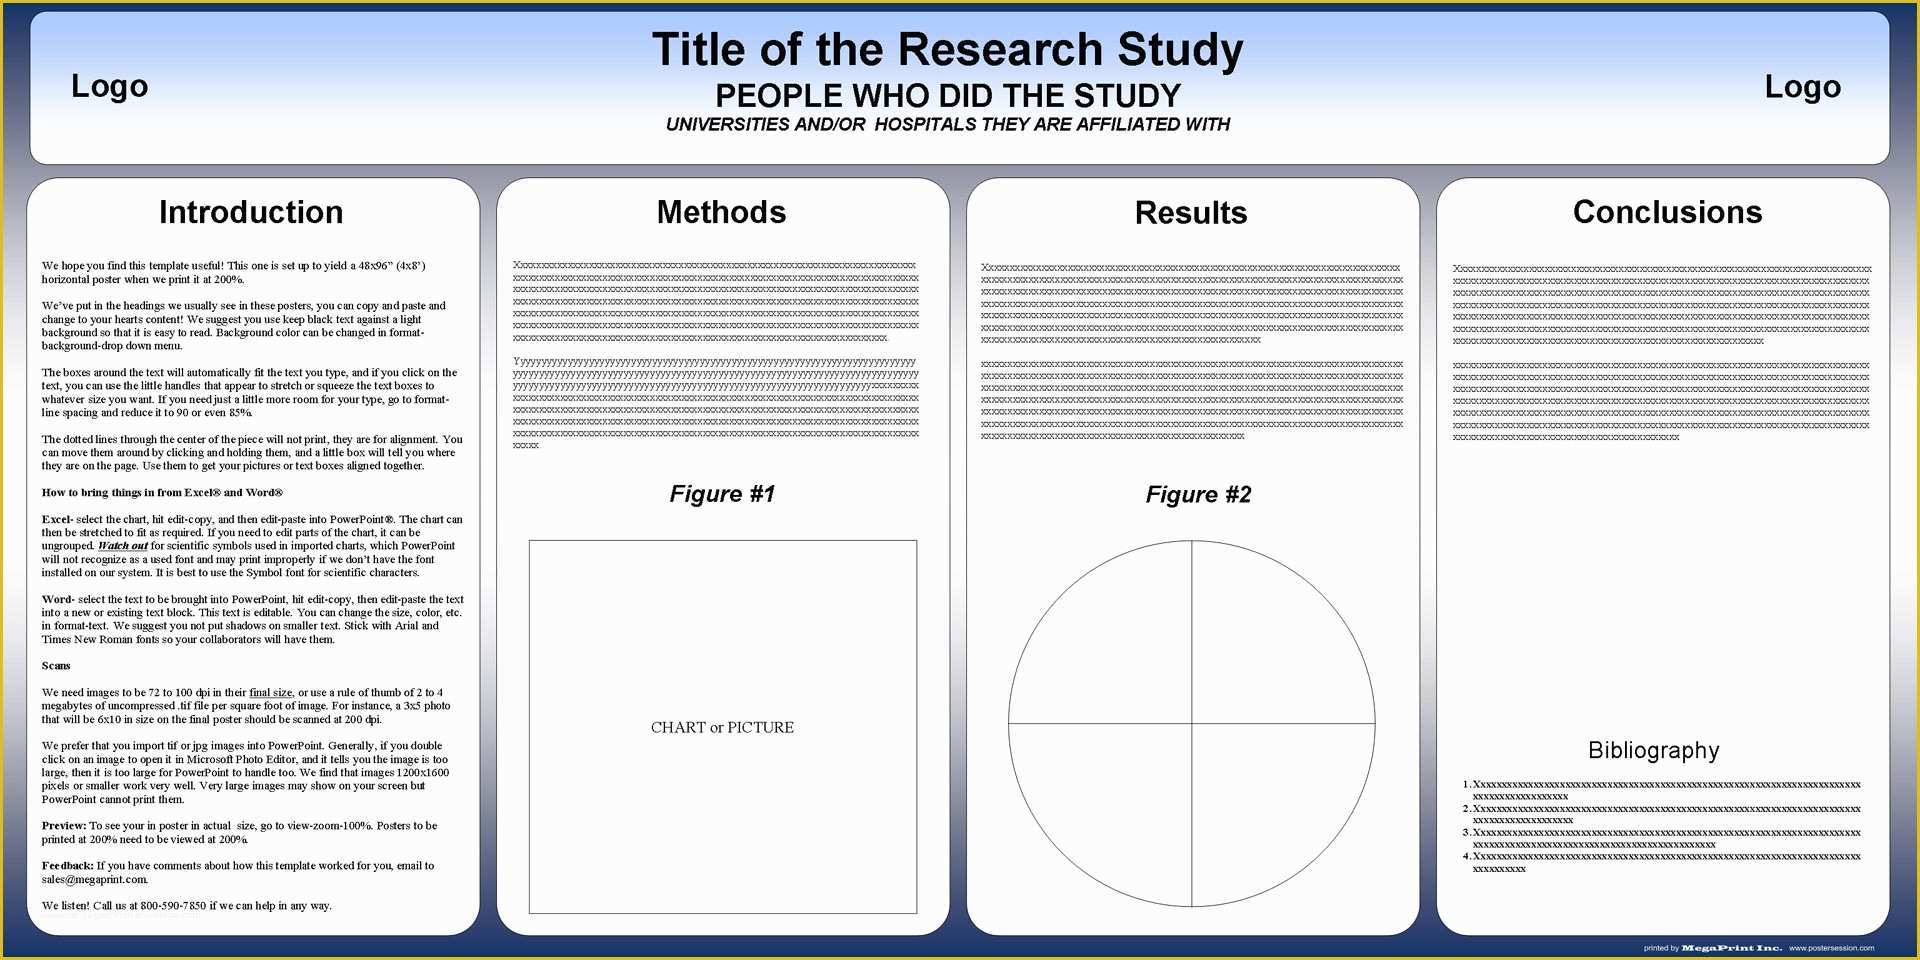 Microsoft Poster Template Free Download Of Free Powerpoint Scientific Research Poster Templates for